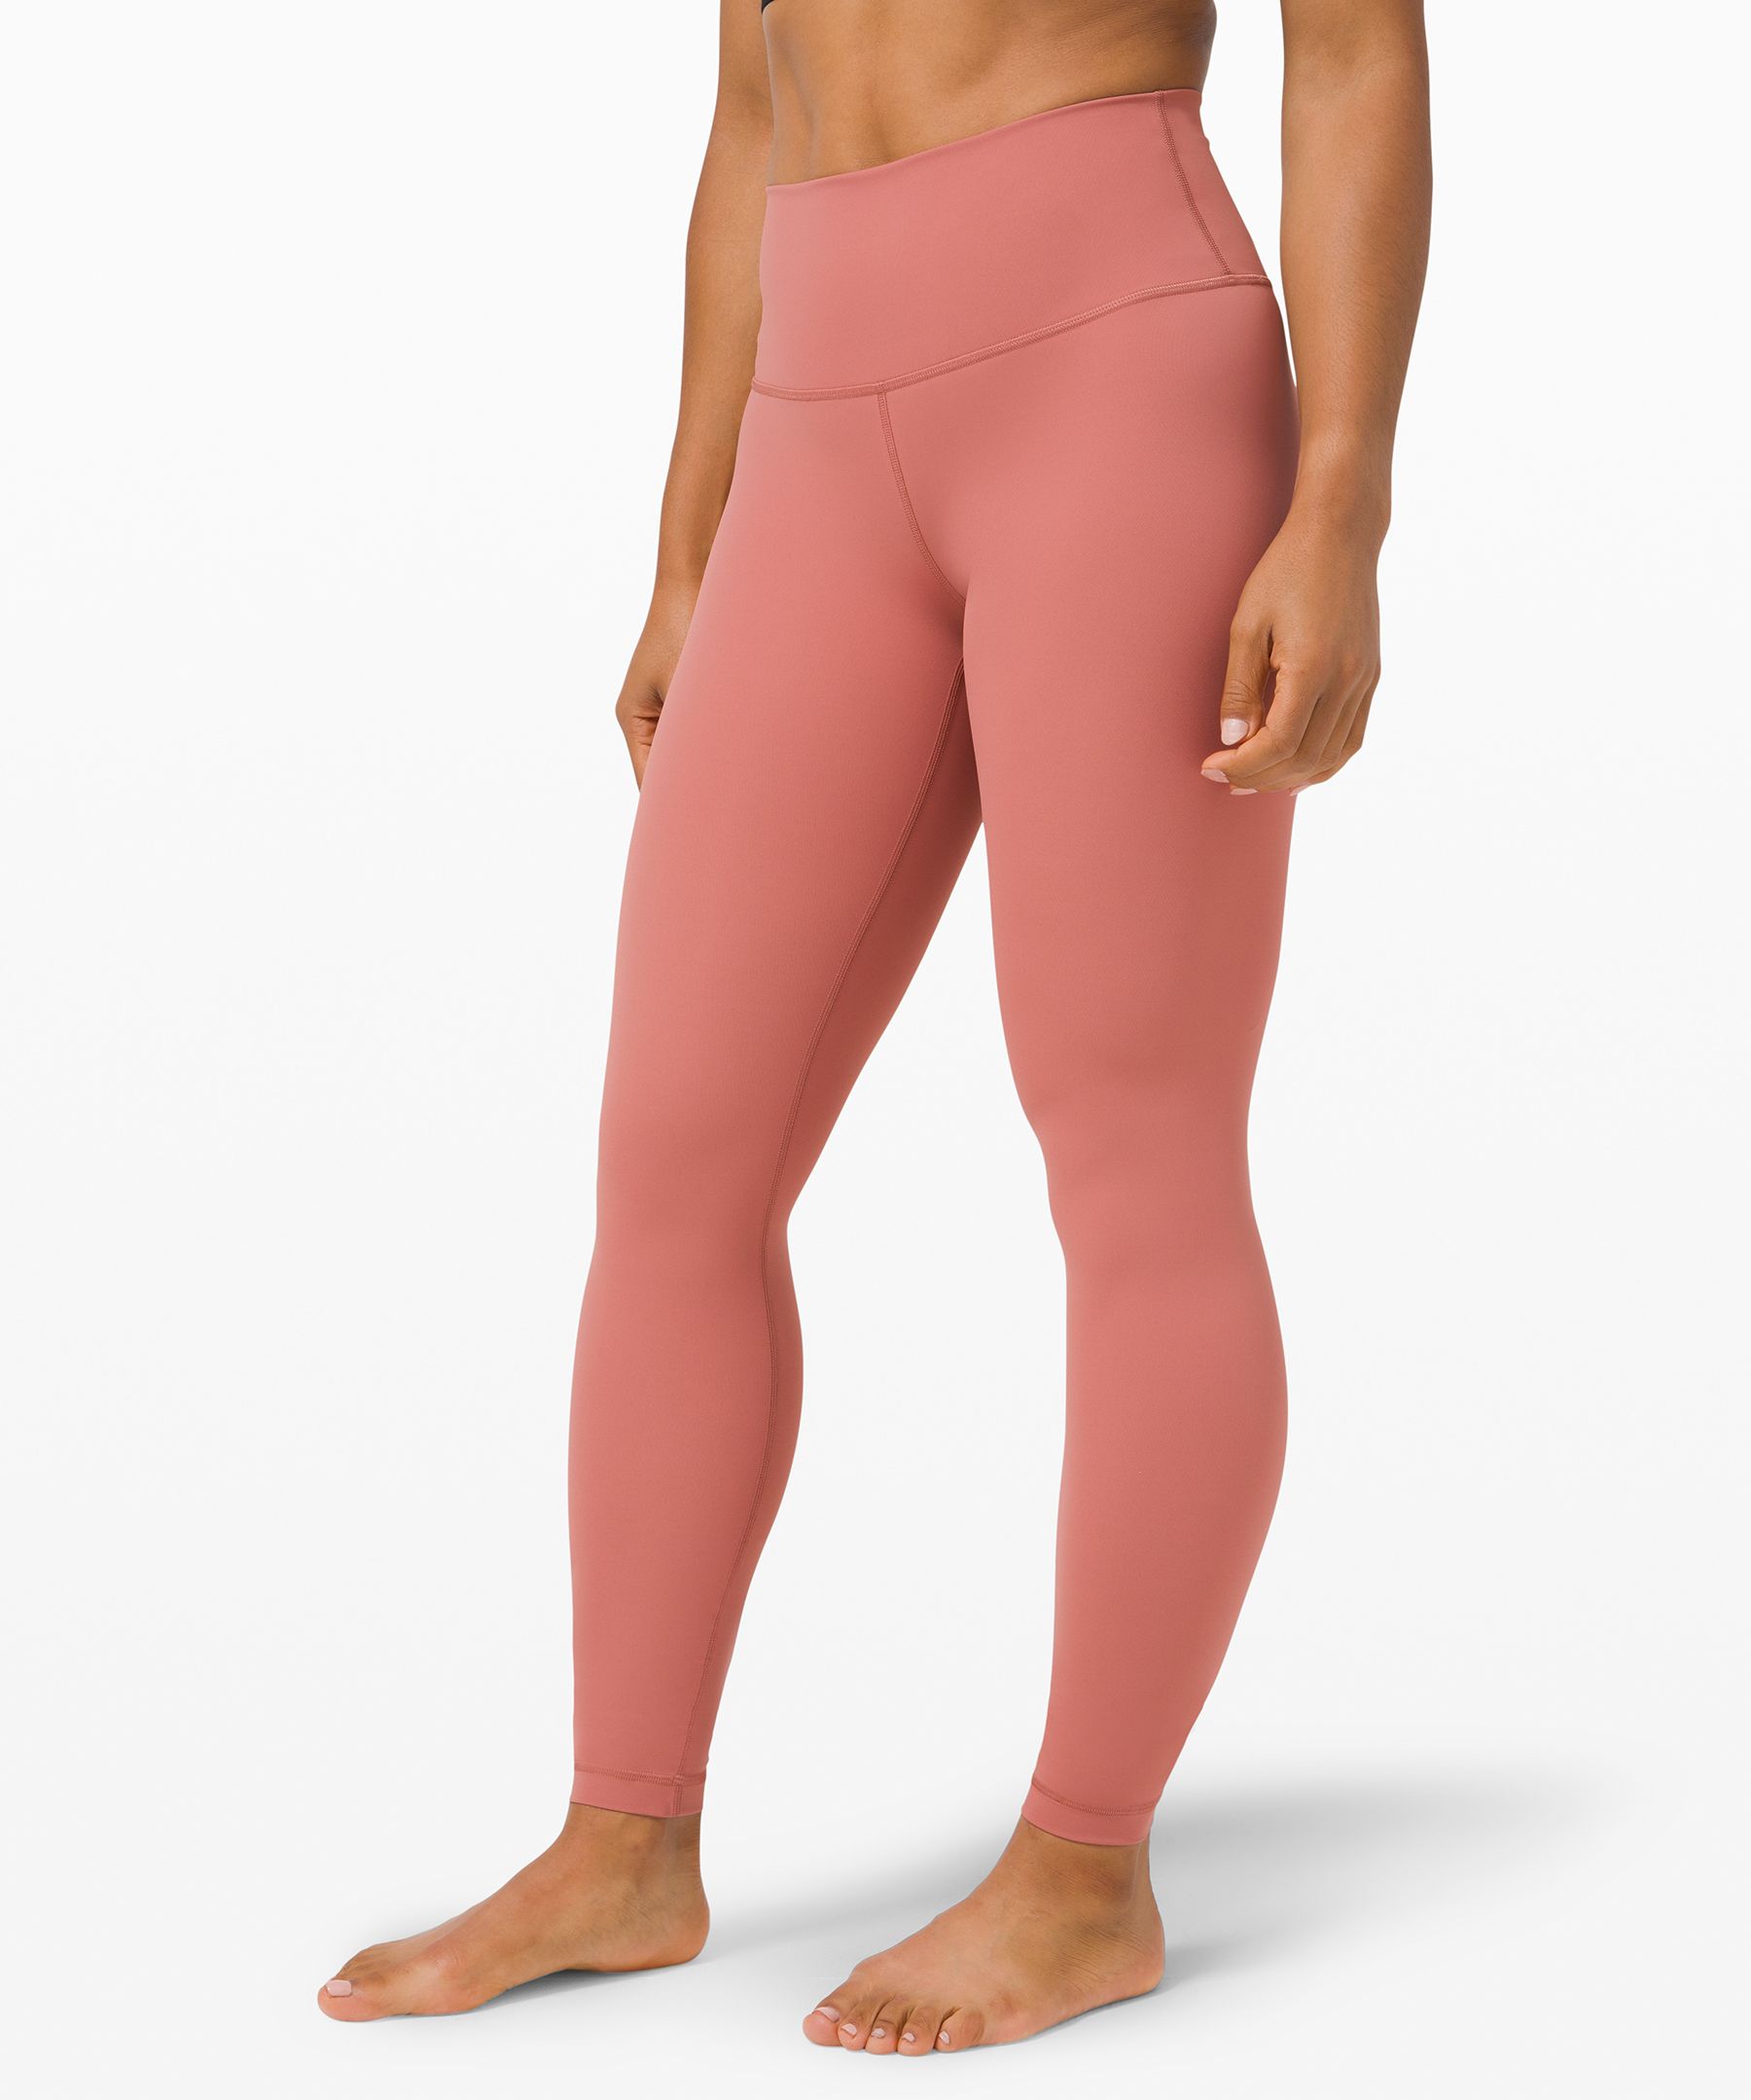 Lululemon Wunder Under High-rise Tights 28" Full-on Luxtreme In Brier Rose